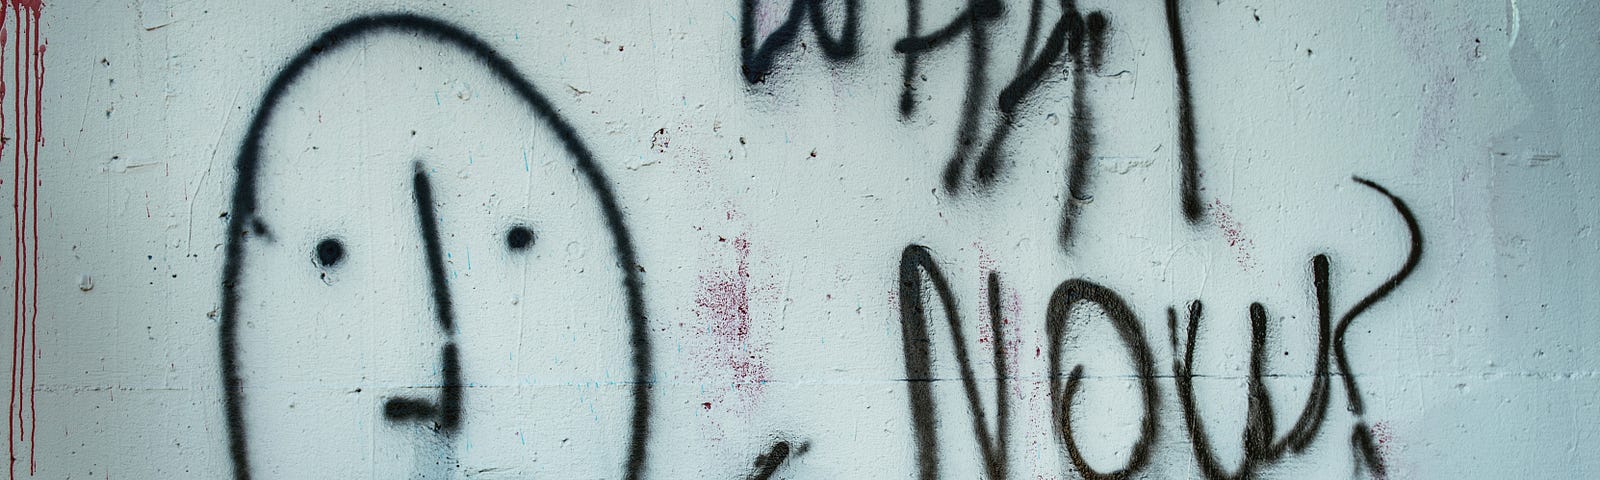 Black, spray-painted graffito on plain, white wall. It is a plain face with two dots for eyes, a nose between them, and a straight line for a mouth. Beside it, to the left, is a line and the words WHAT NOW? in all capital letters.